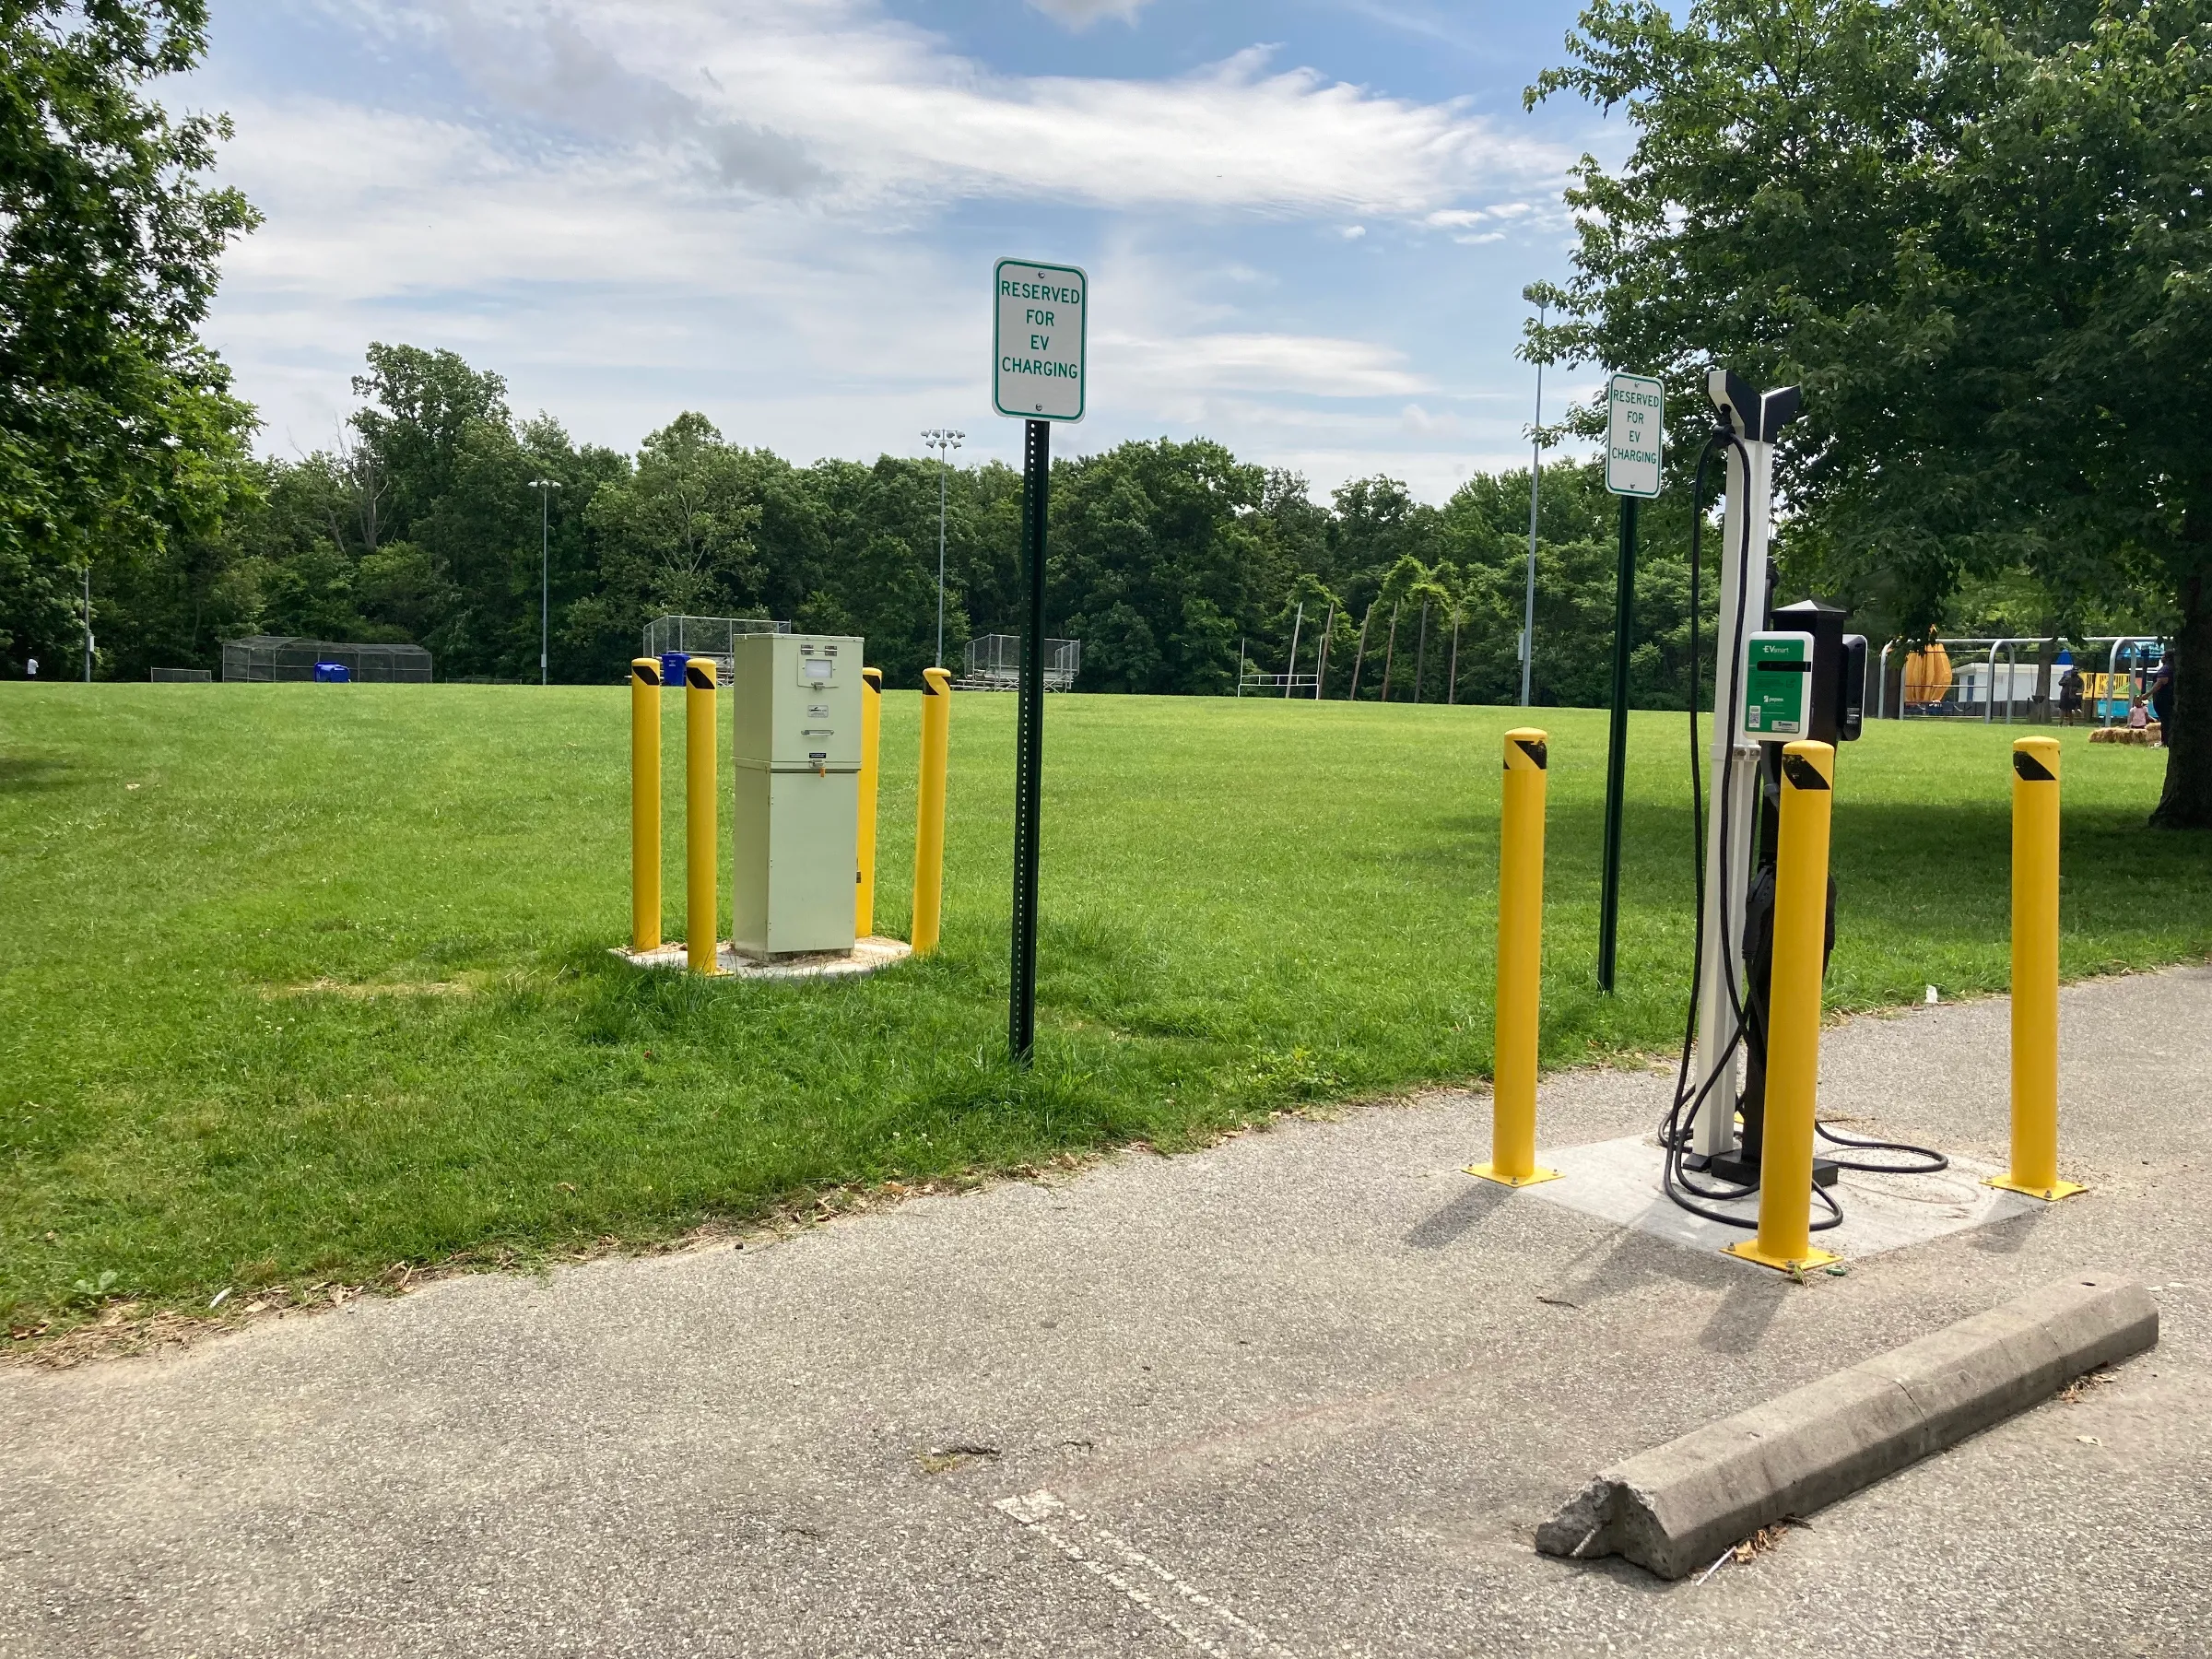 A newly installed electric-vehicle charger at a park in Prince George’s County